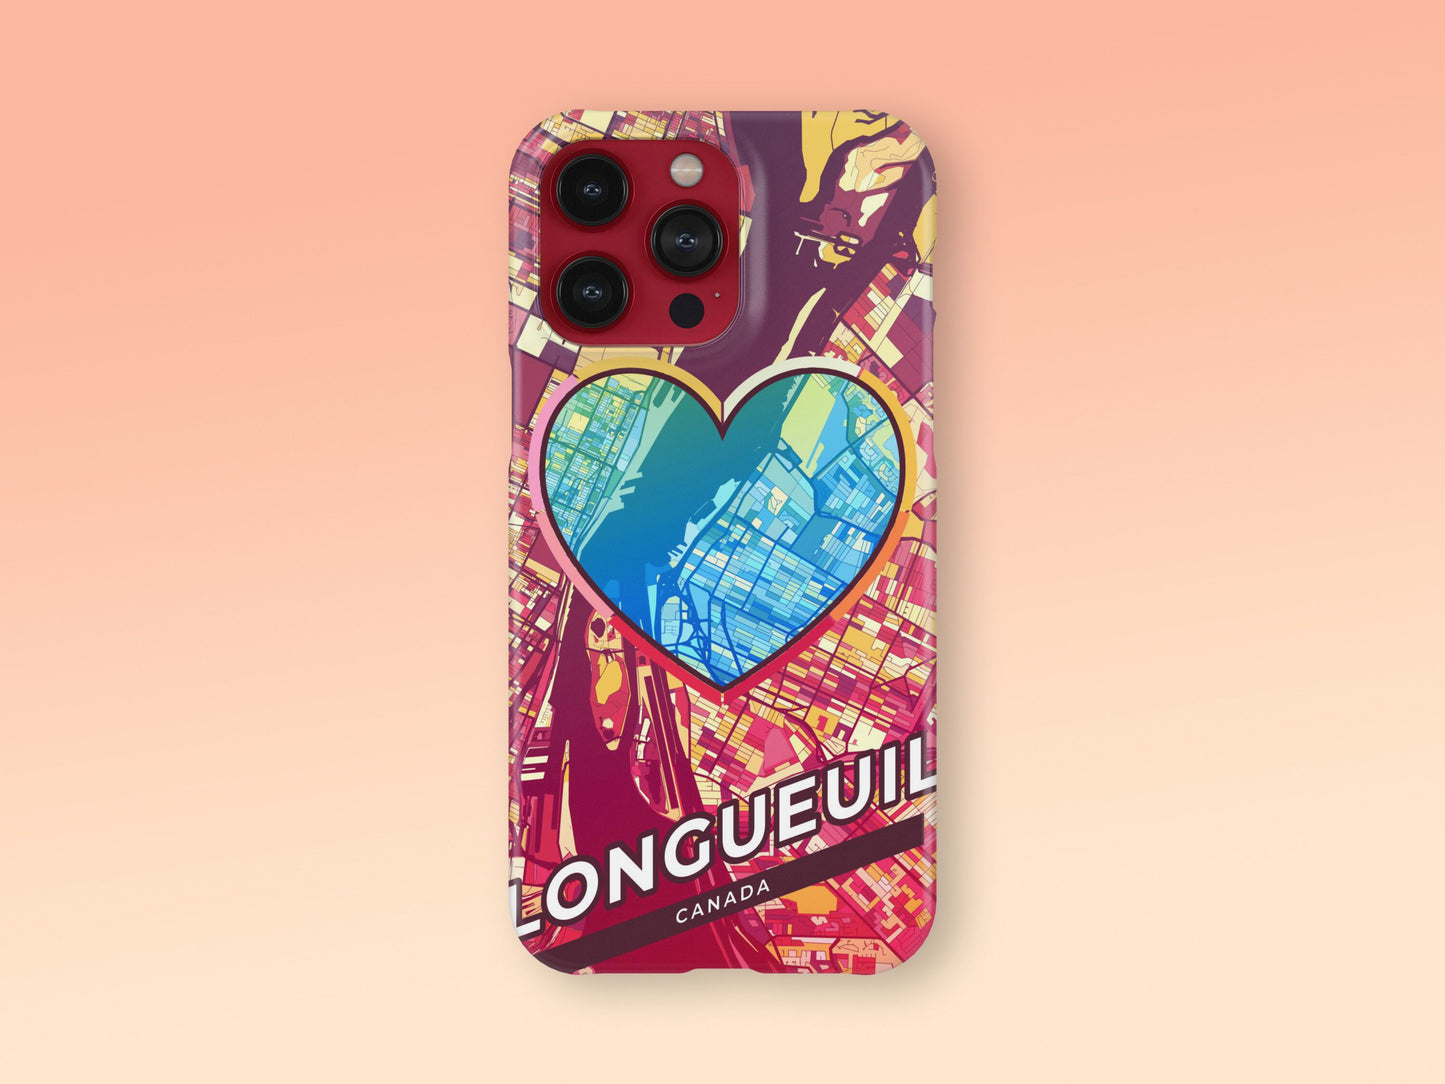 Longueuil Canada slim phone case with colorful icon. Birthday, wedding or housewarming gift. Couple match cases. 2